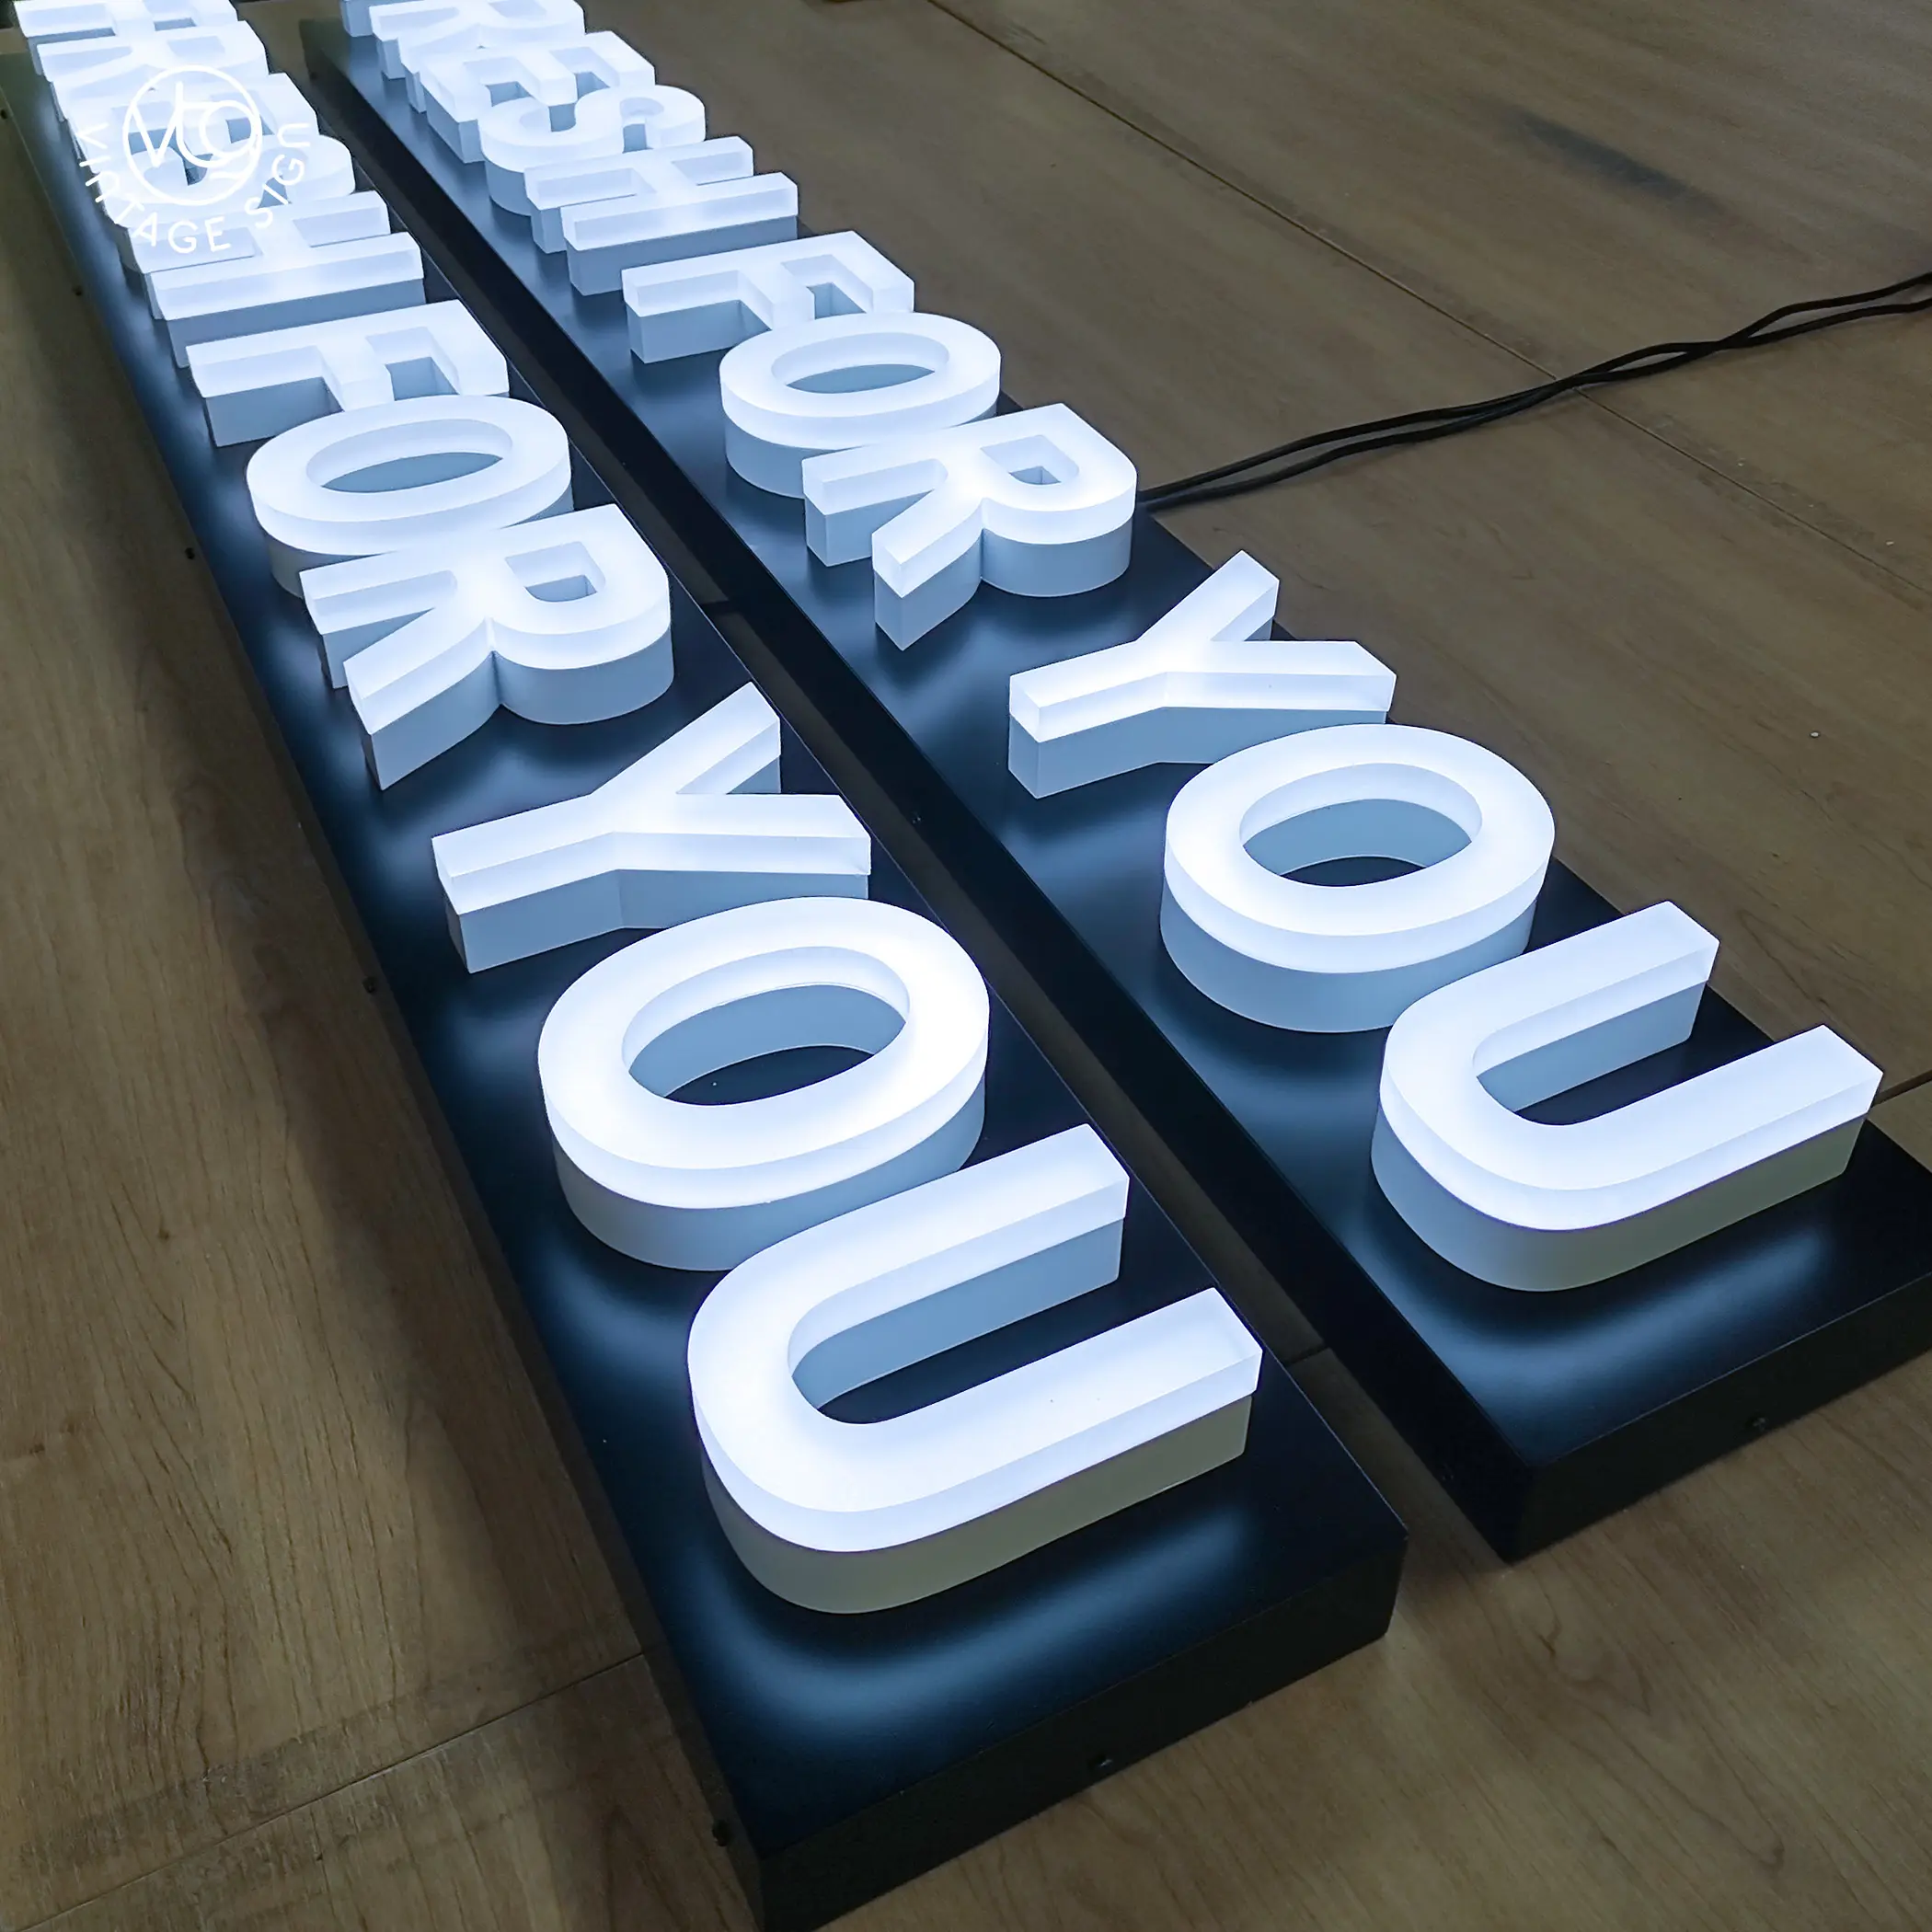 Frontlit Acrylic Letters Sign Light Up Metal Letter Lighting 3d Illuminated Signage